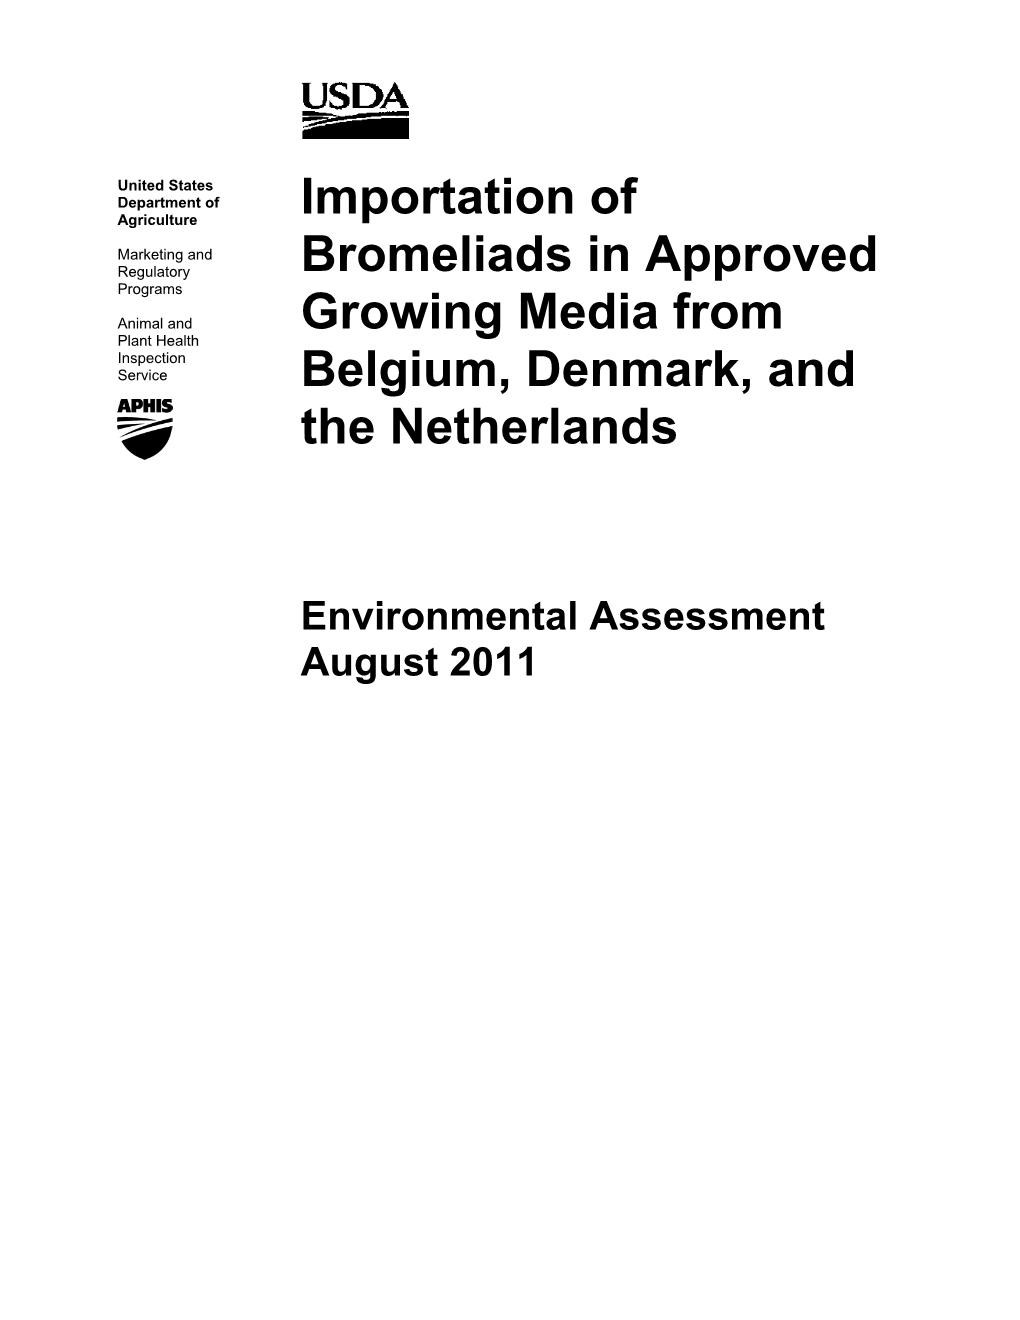 Importation of Bromeliads in Approved Growing Media from Belgium, Denmark, and the Netherlands